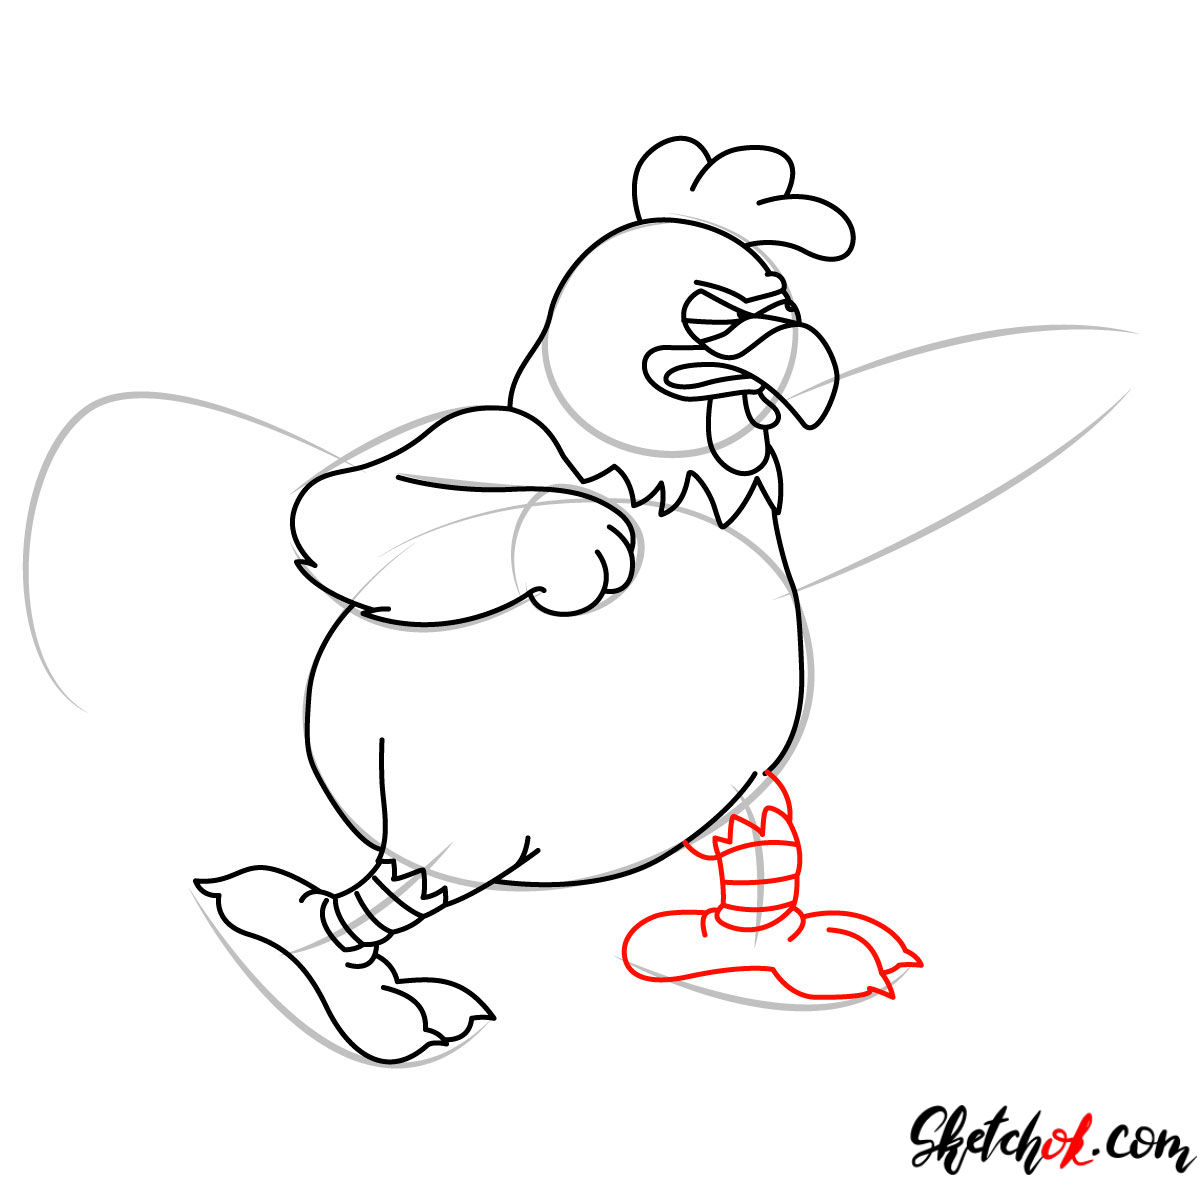 How to draw Ernie the Giant Chicken - step 08